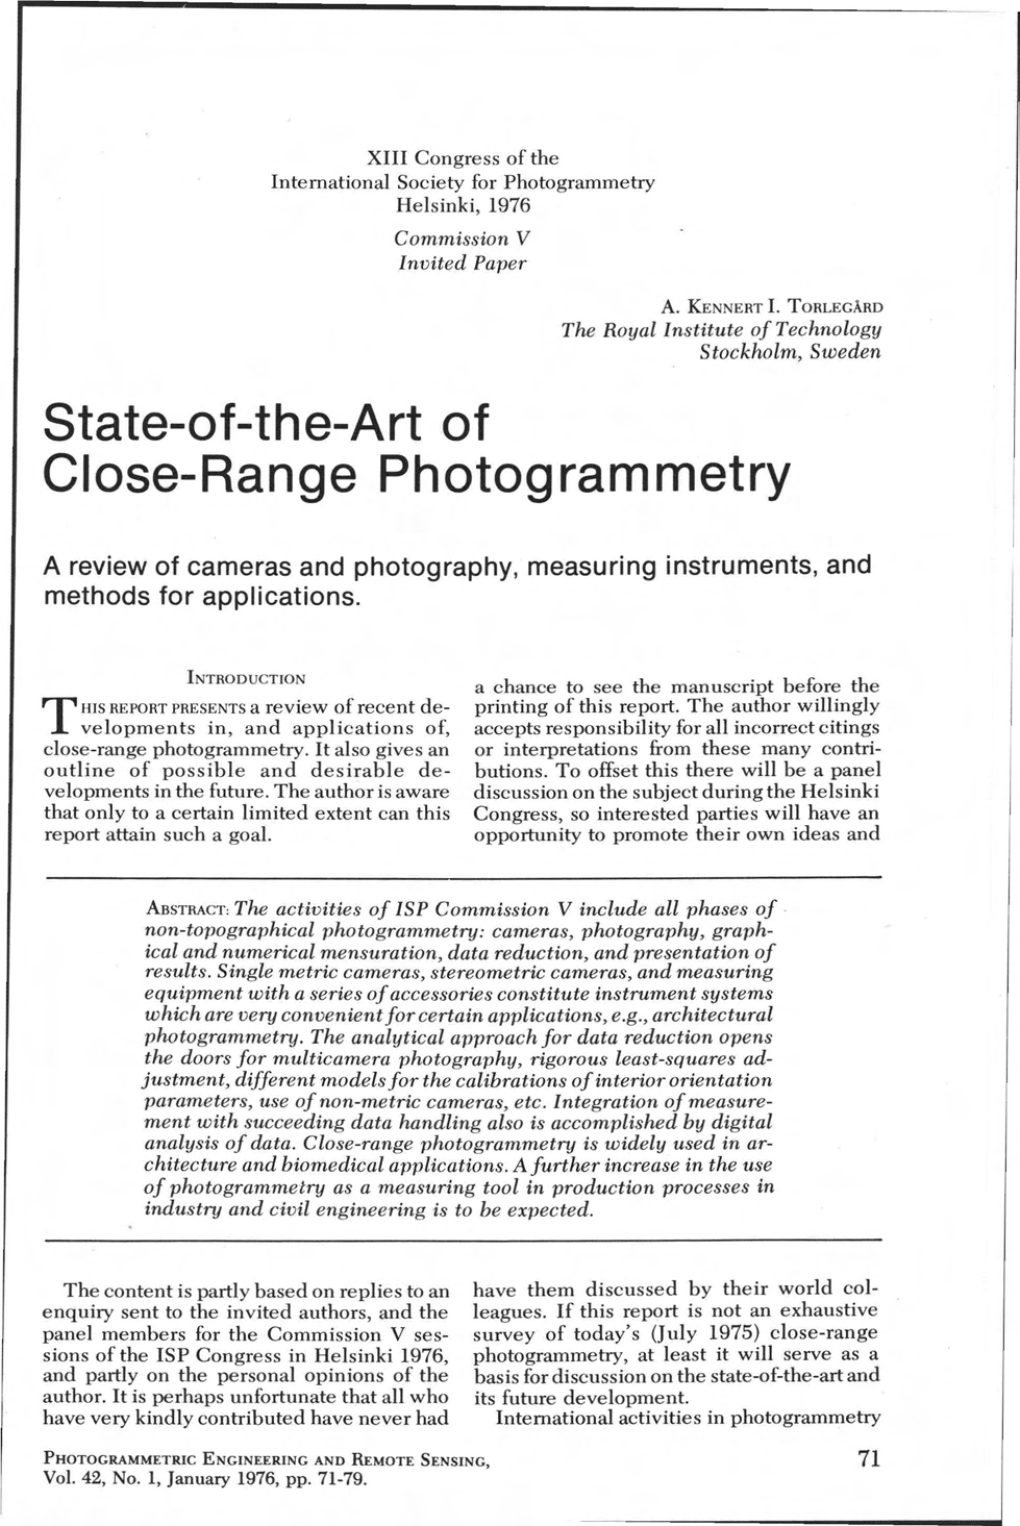 State-Of-The-Art of Close-Range Photogrammetry